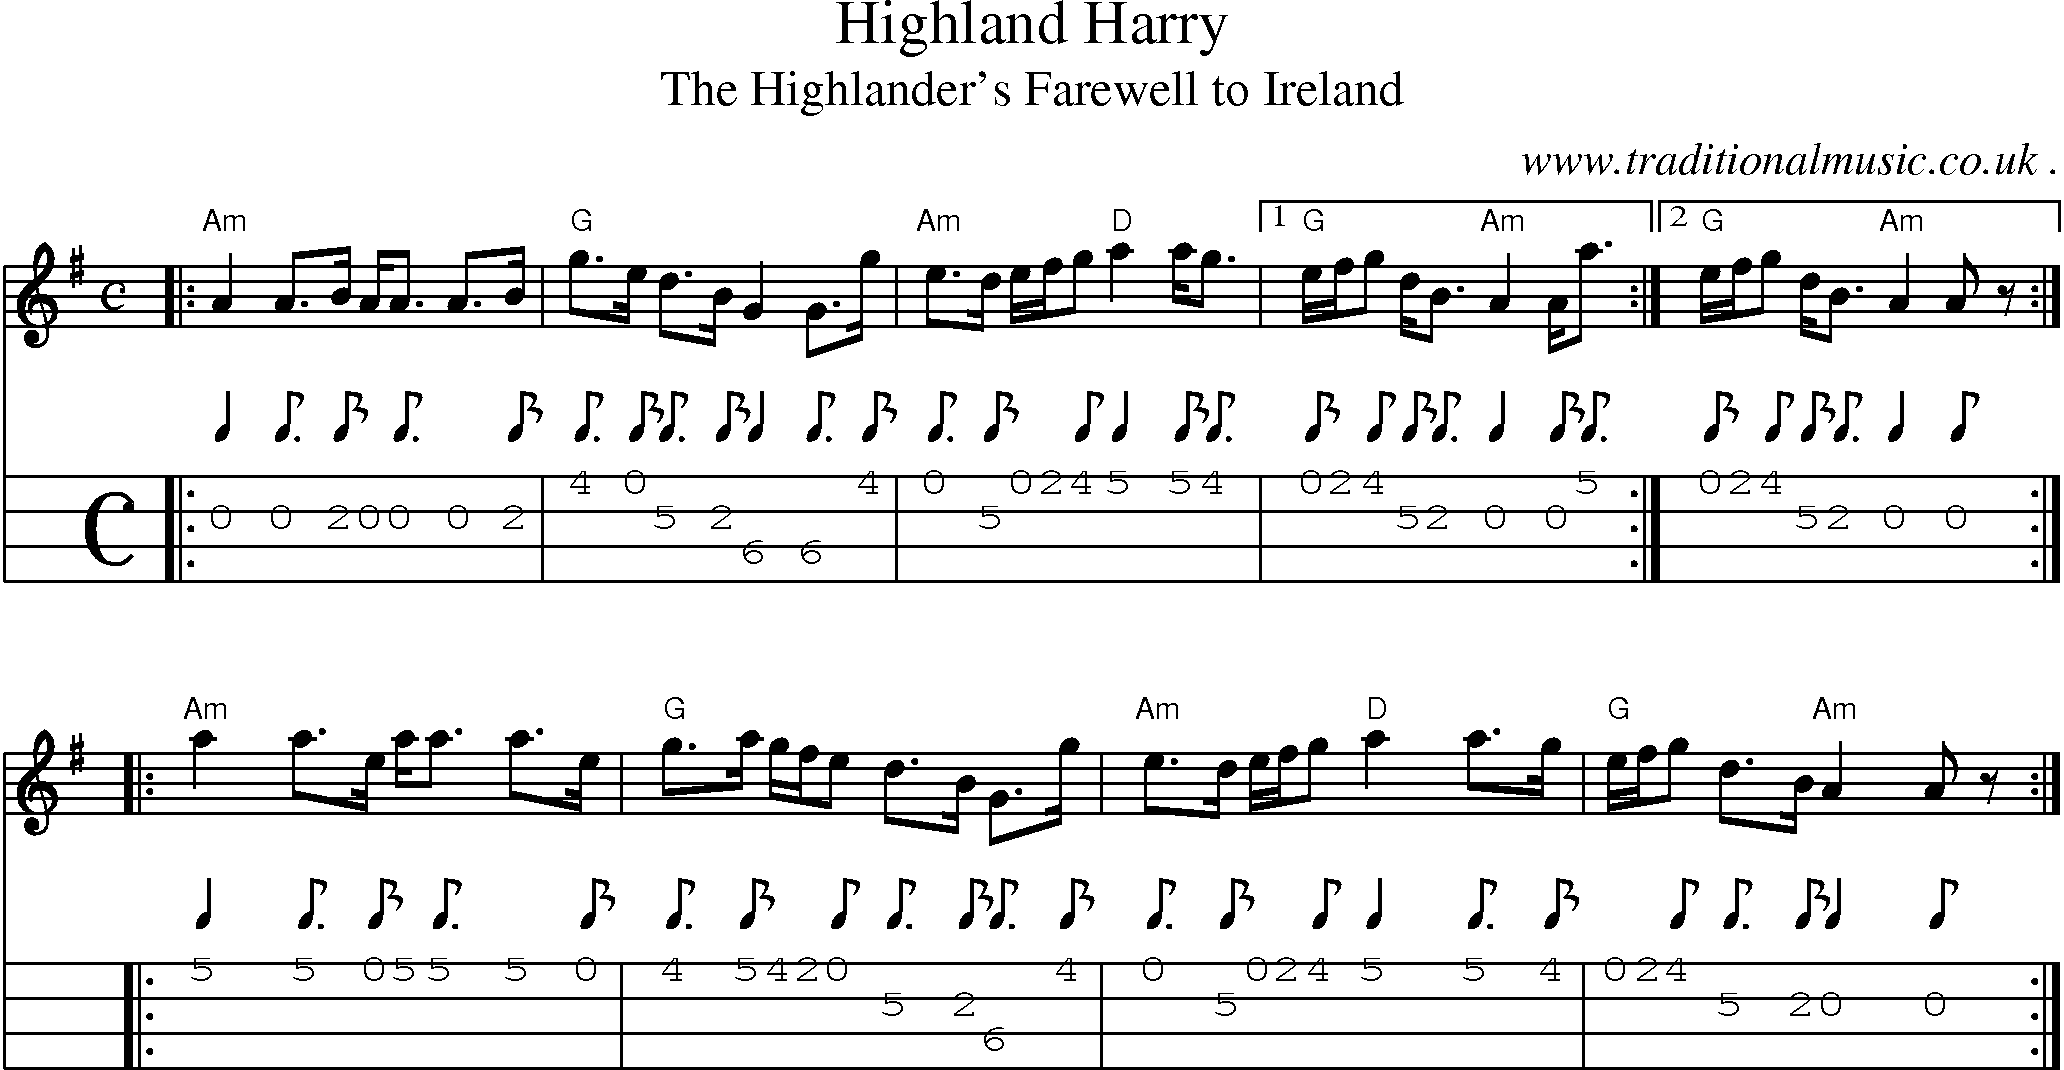 Sheet-music  score, Chords and Mandolin Tabs for Highland Harry